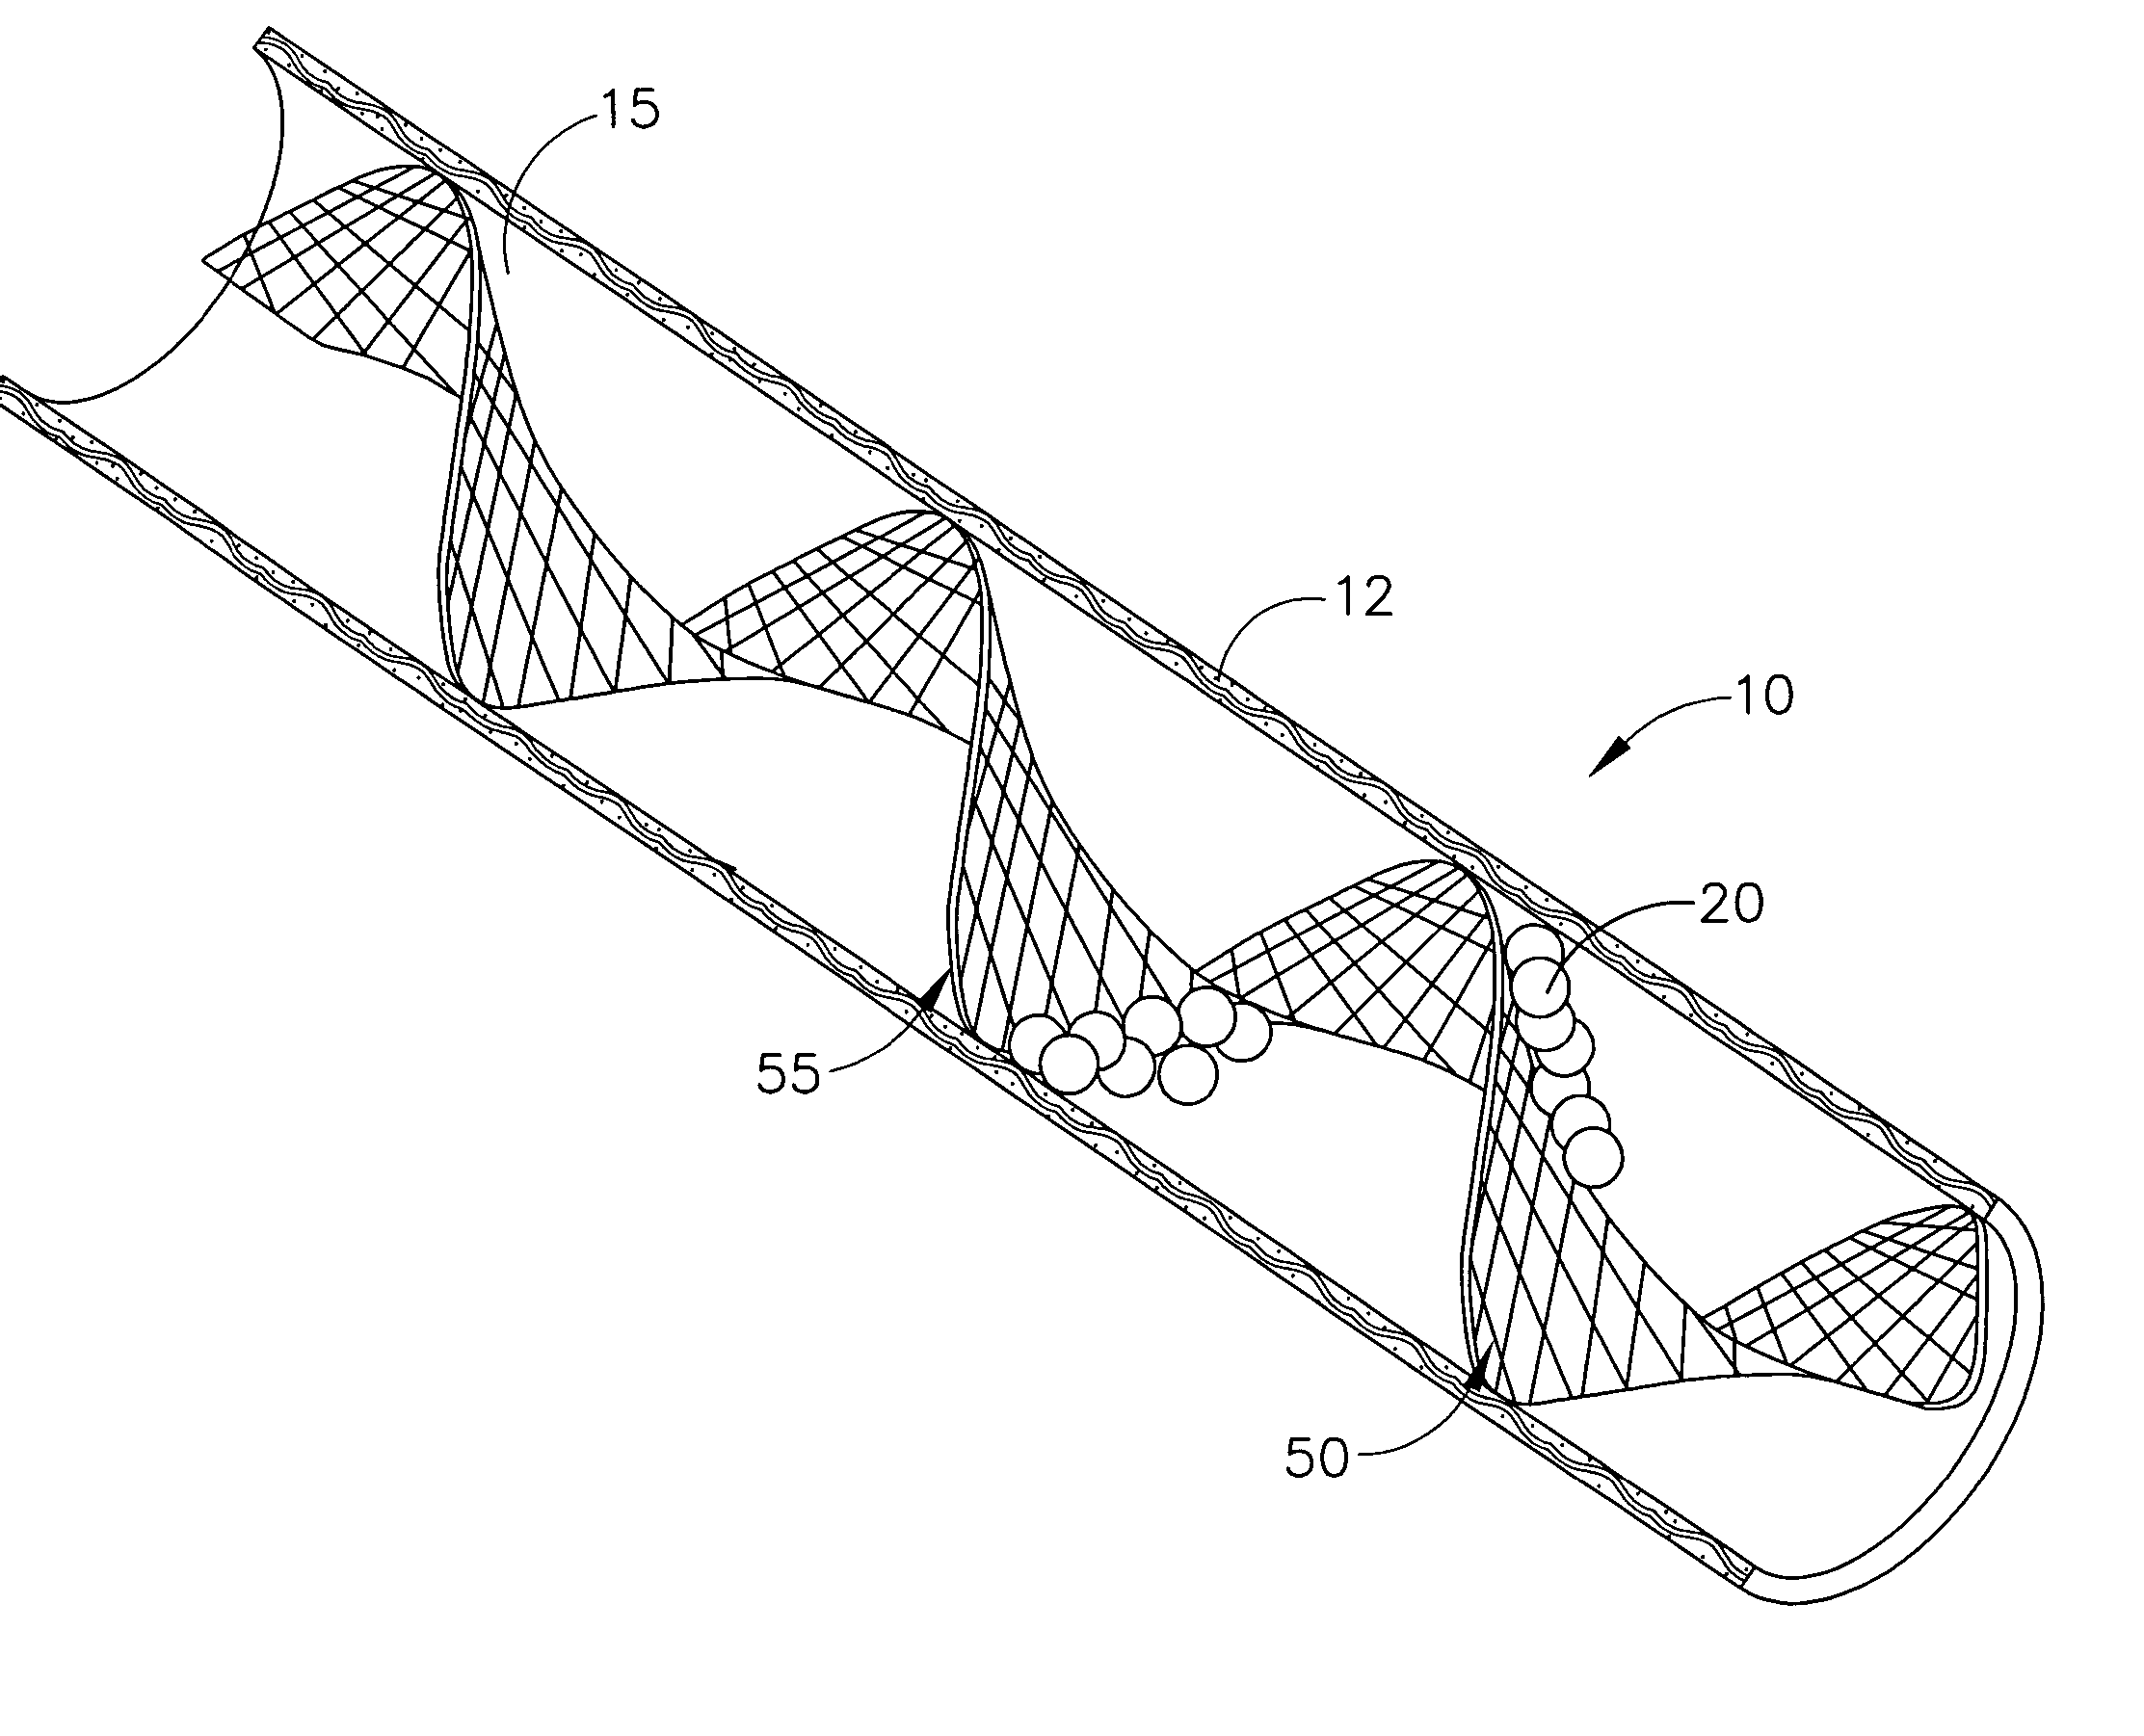 Device for filtering blood in a vessel with helical elements